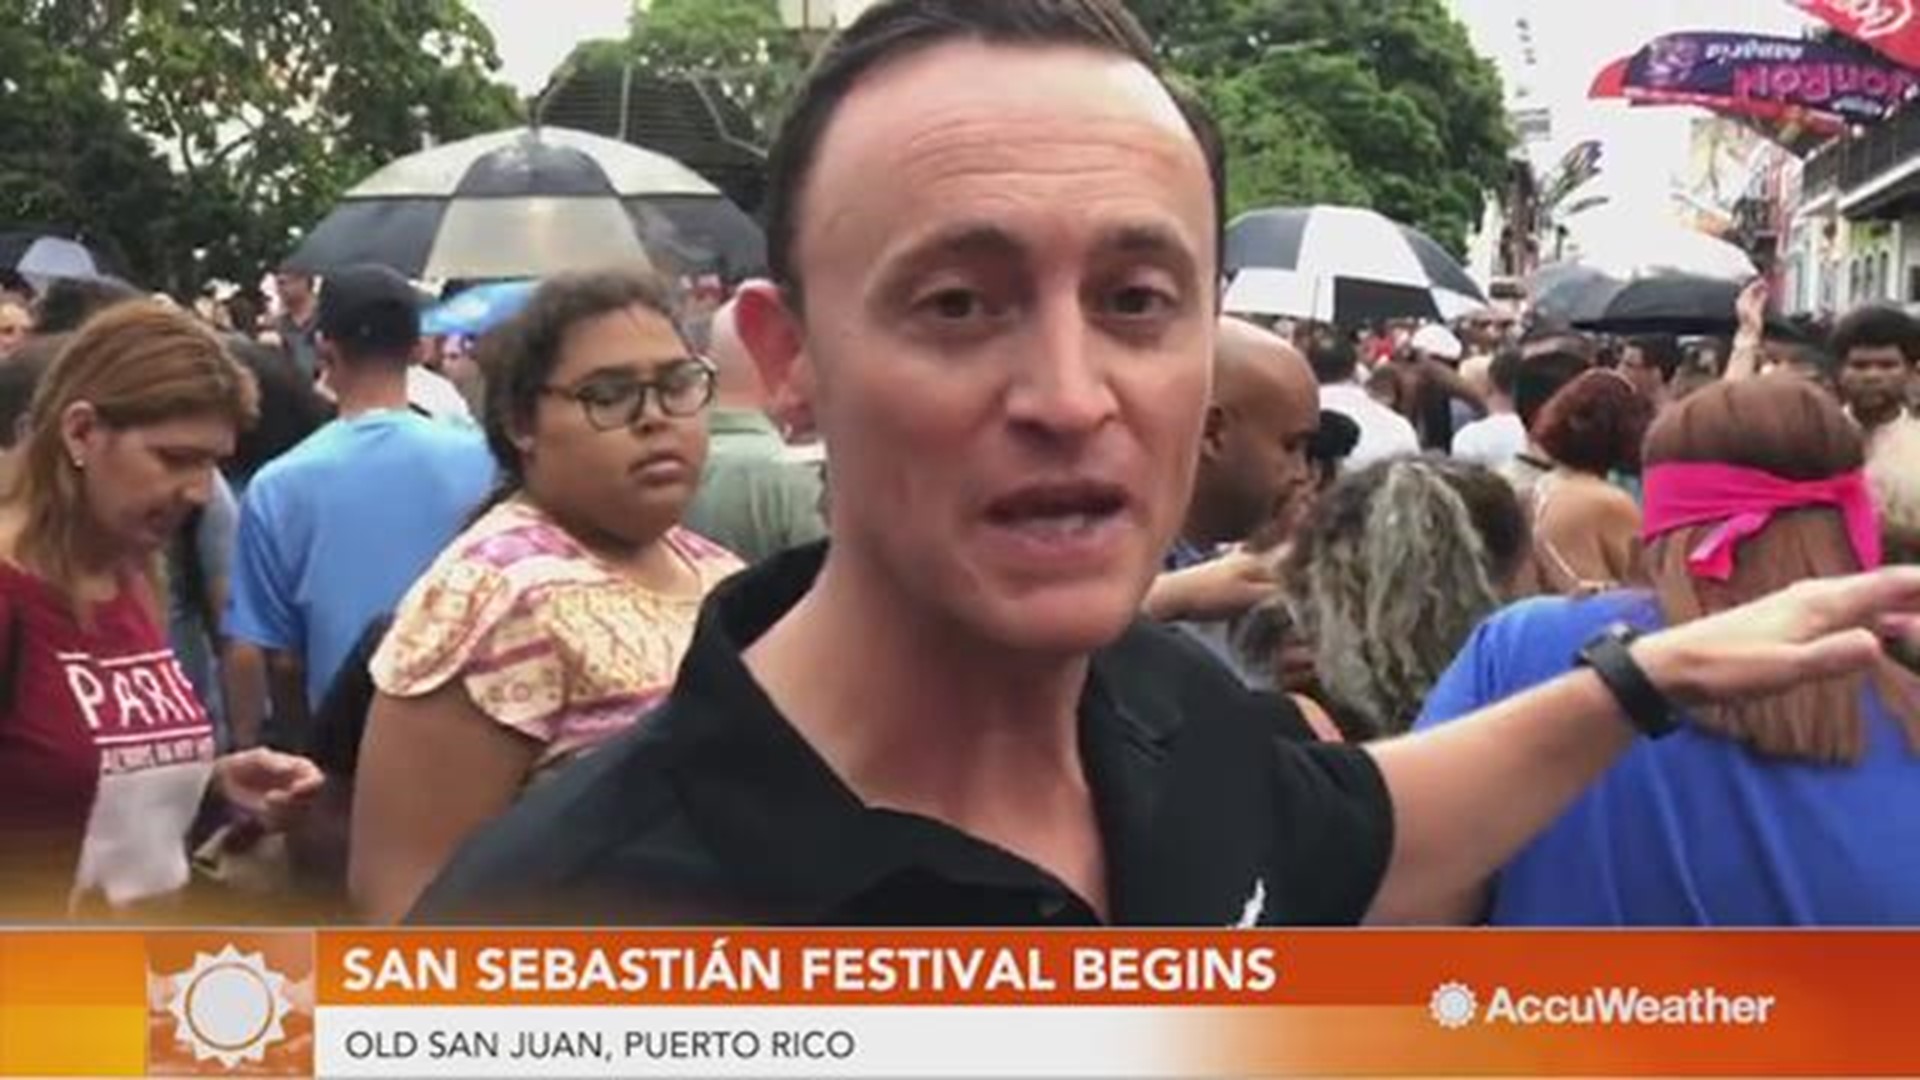 The San Sebastián Festival in Old San Juan, Puerto Rico is the largest in the U.S. territory and one of the largest in the Caribbean region.  According to AccuWeather's Jonathan Petramala, it was the first real celebration of this holiday before Hurricane